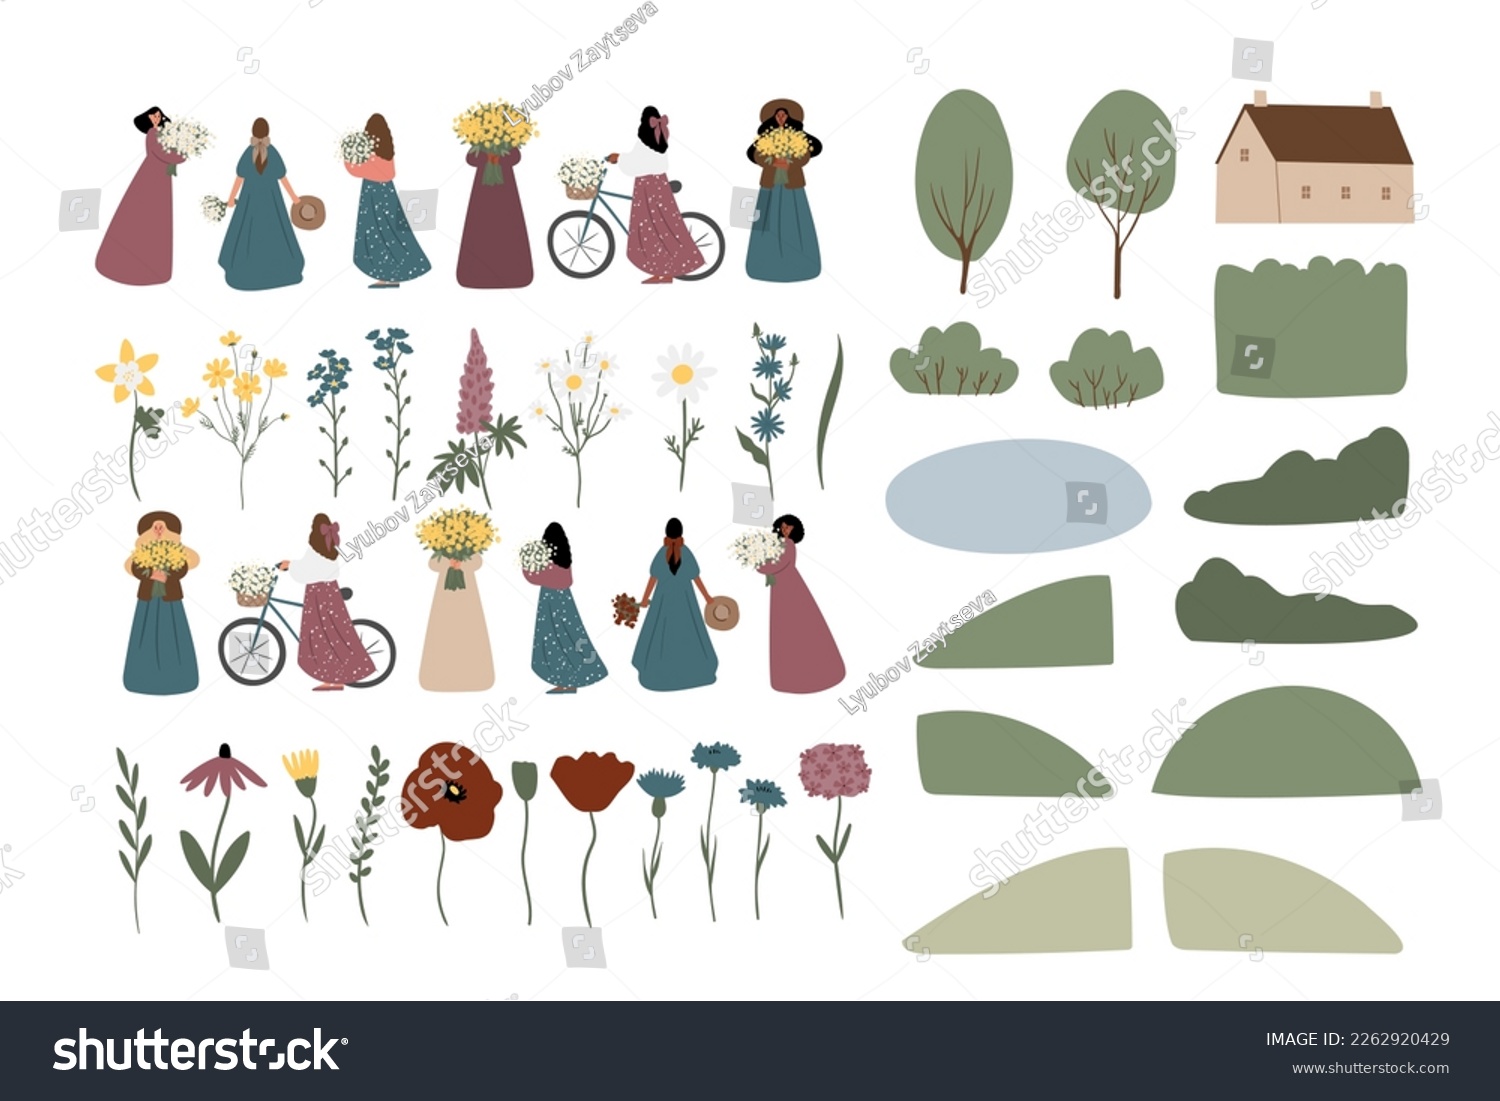 SVG of wildflower woman illustration clipart, vector cottagecore landscape clip art, png ai svg girl images in flat cartoon style, daisy, columbine, cosmos, forget me not, lupine, phlox svg